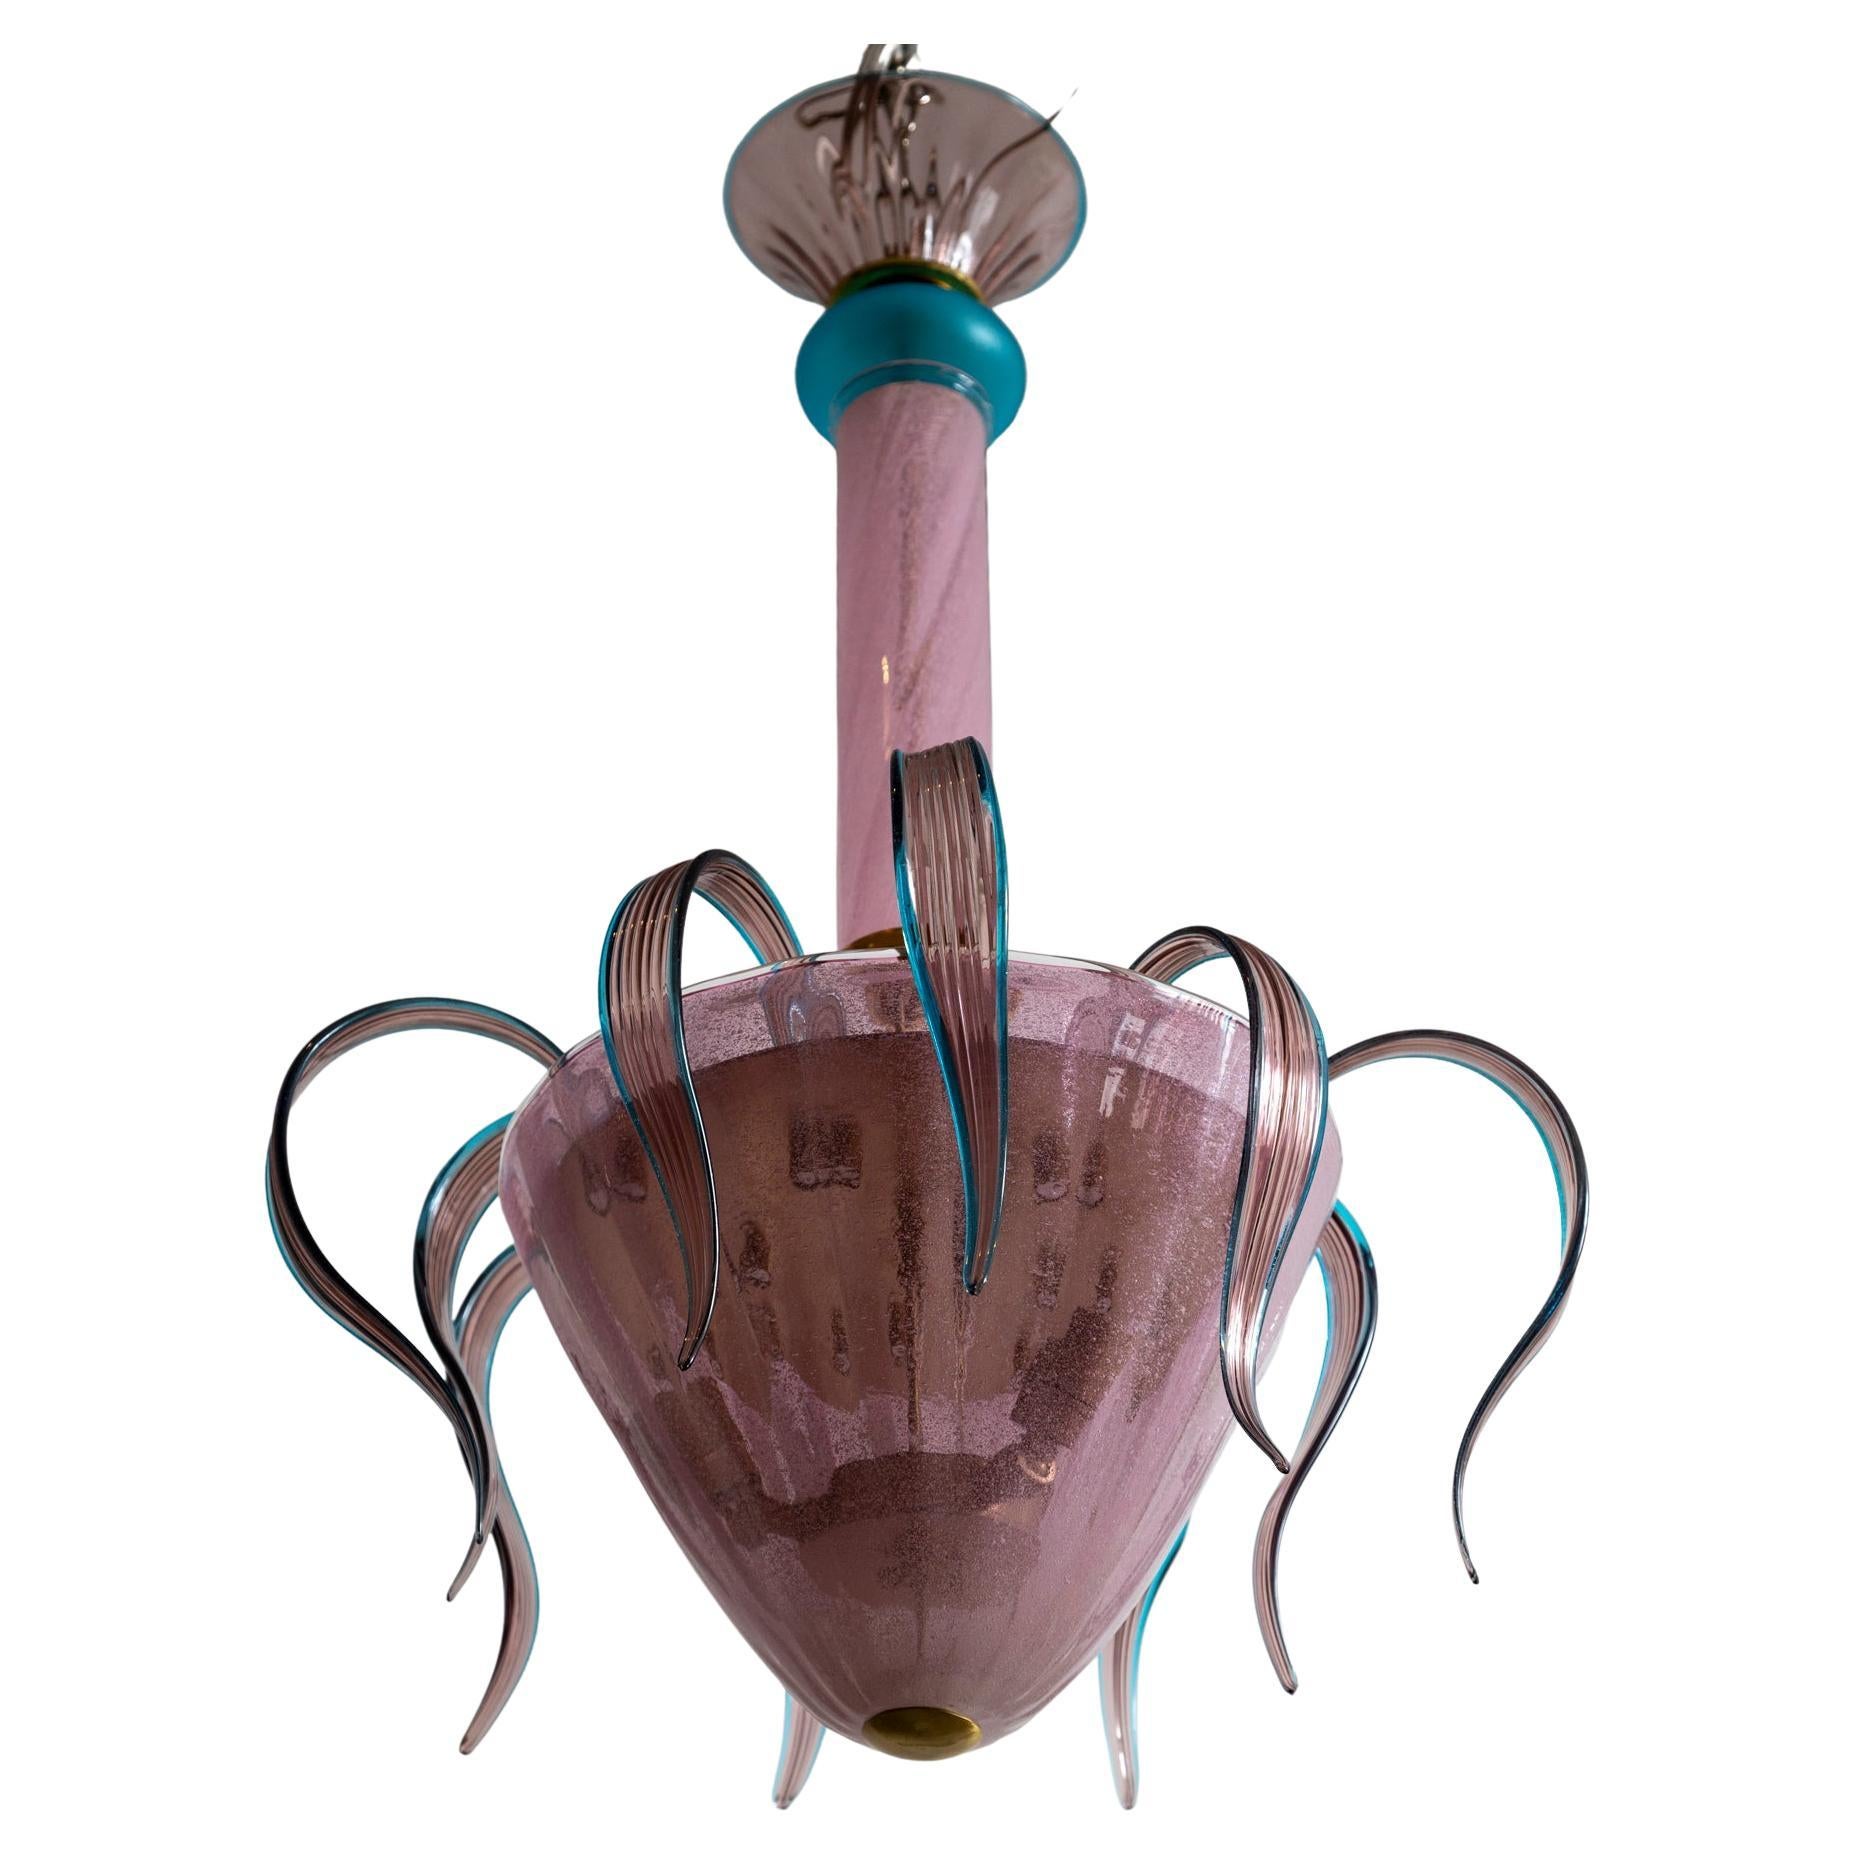 Whimsical Murano chandelier shown with ten cascading leaves in hues of plum and turquoise. While the fixture is composed of vintage glass the lamping and frame is recent 

The glass canopy may install directly flush to the ceiling or this fixture